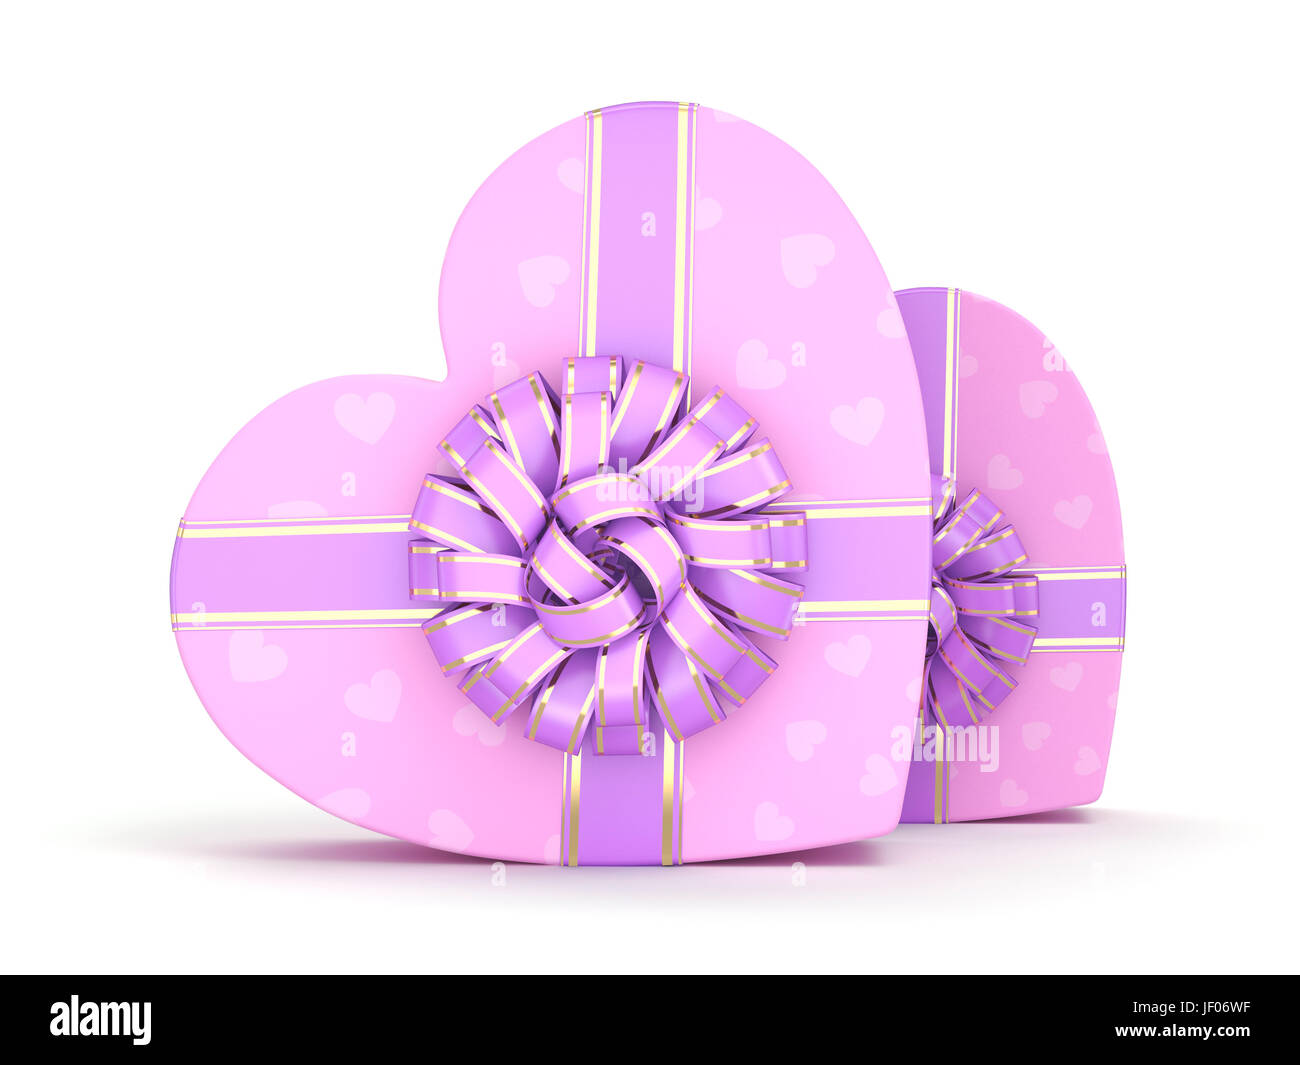 Pink boxes heart Stock Photo